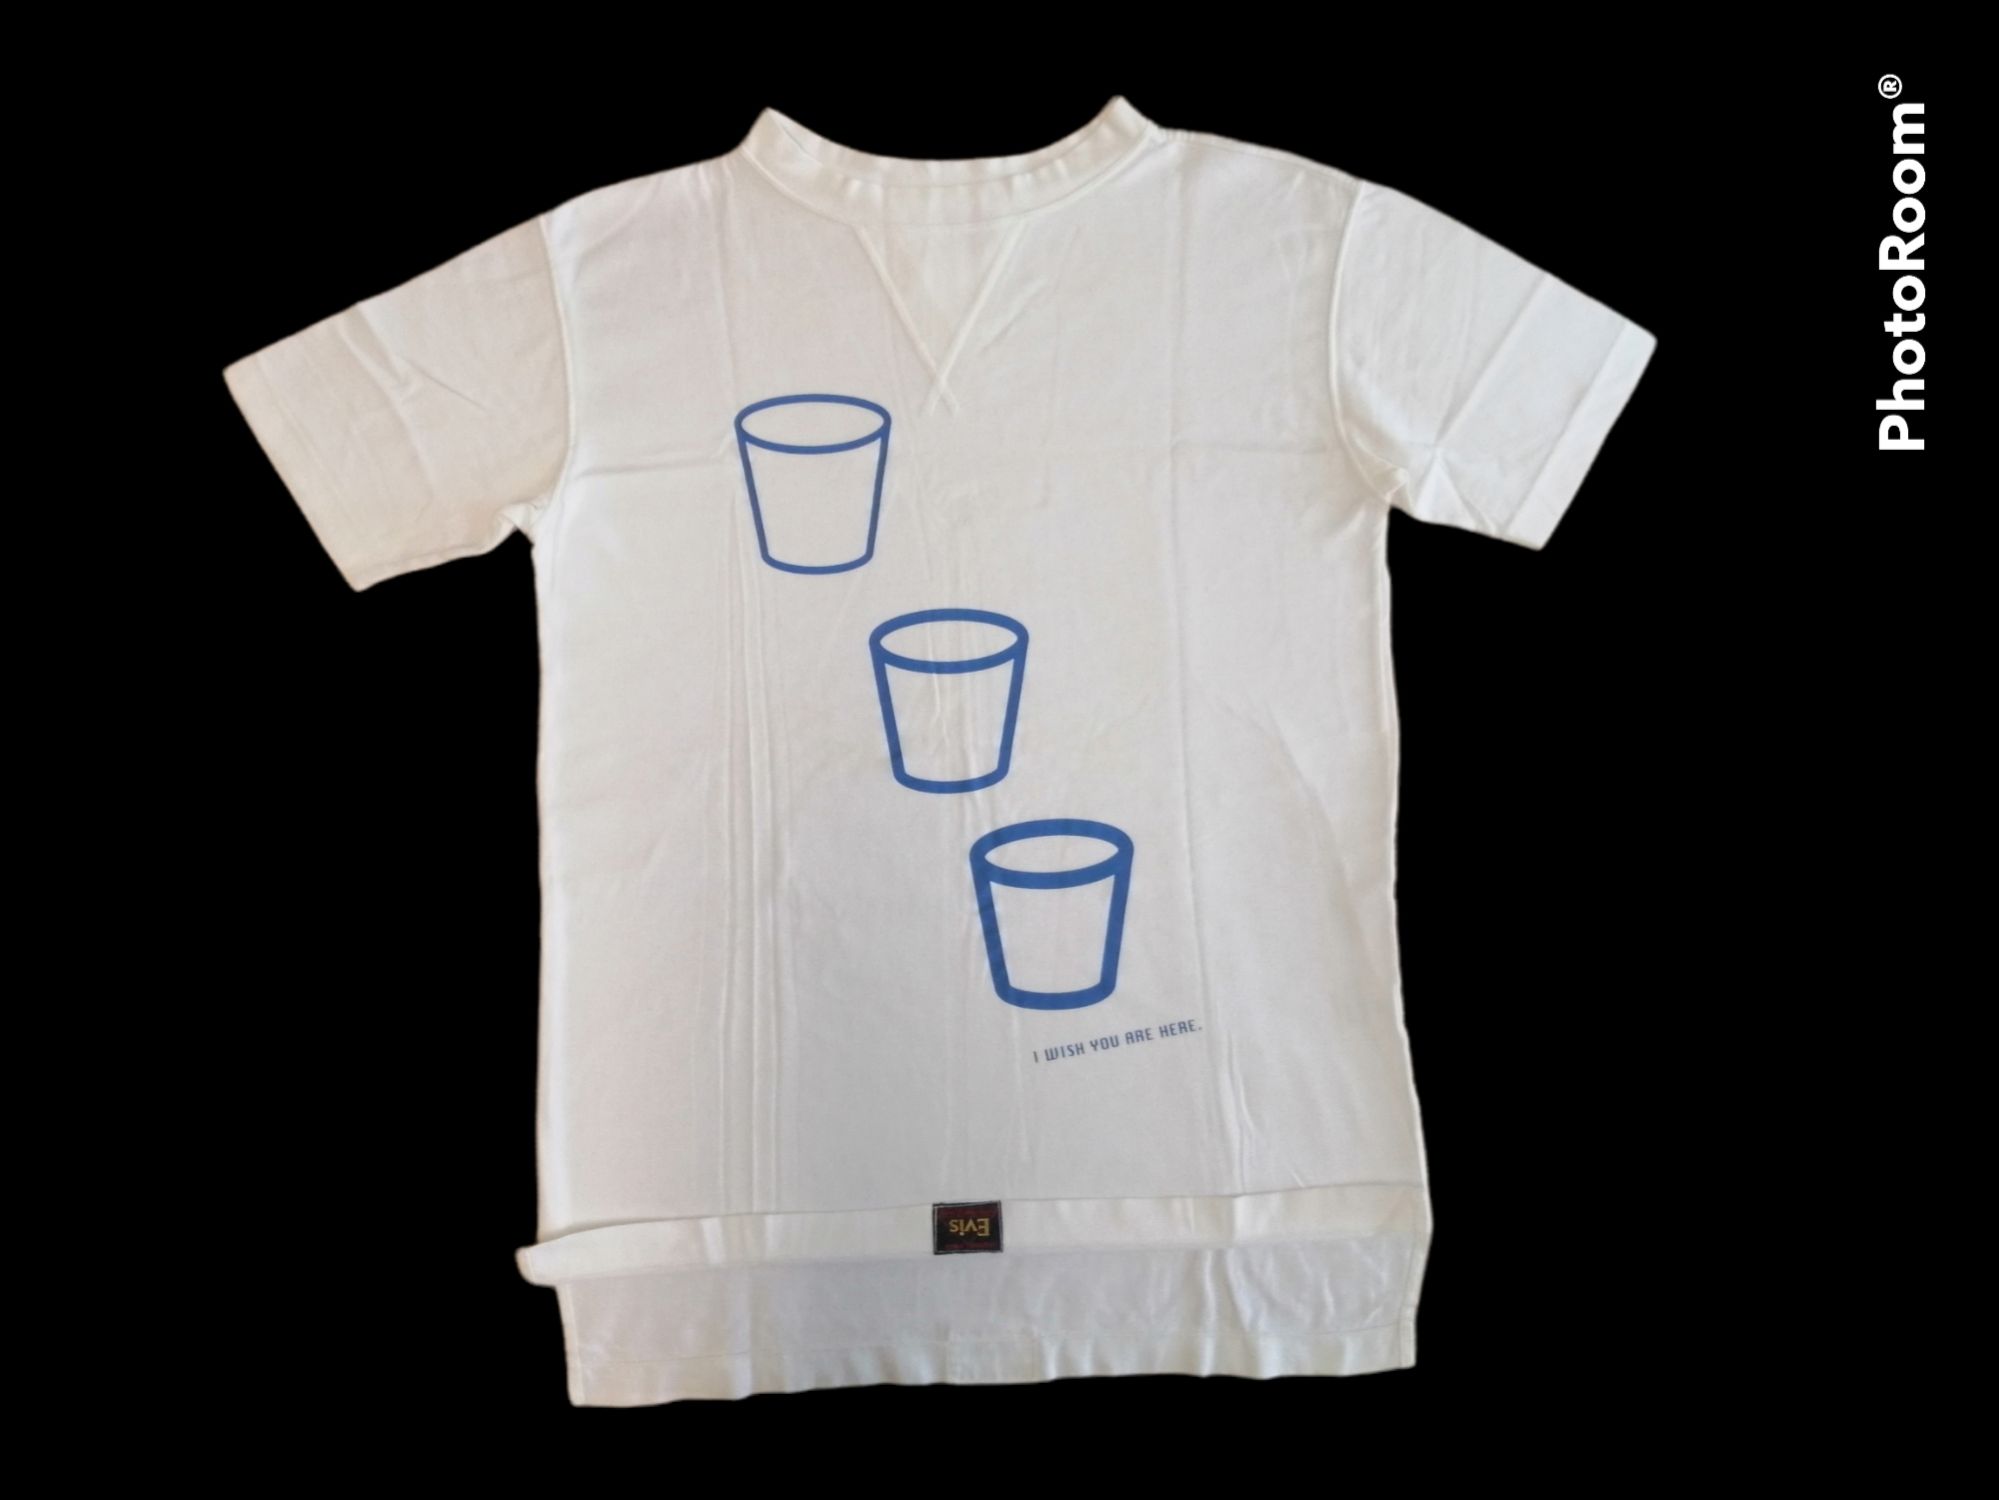 Awesome calpis water X evis evisu collaboration t shirt - 3